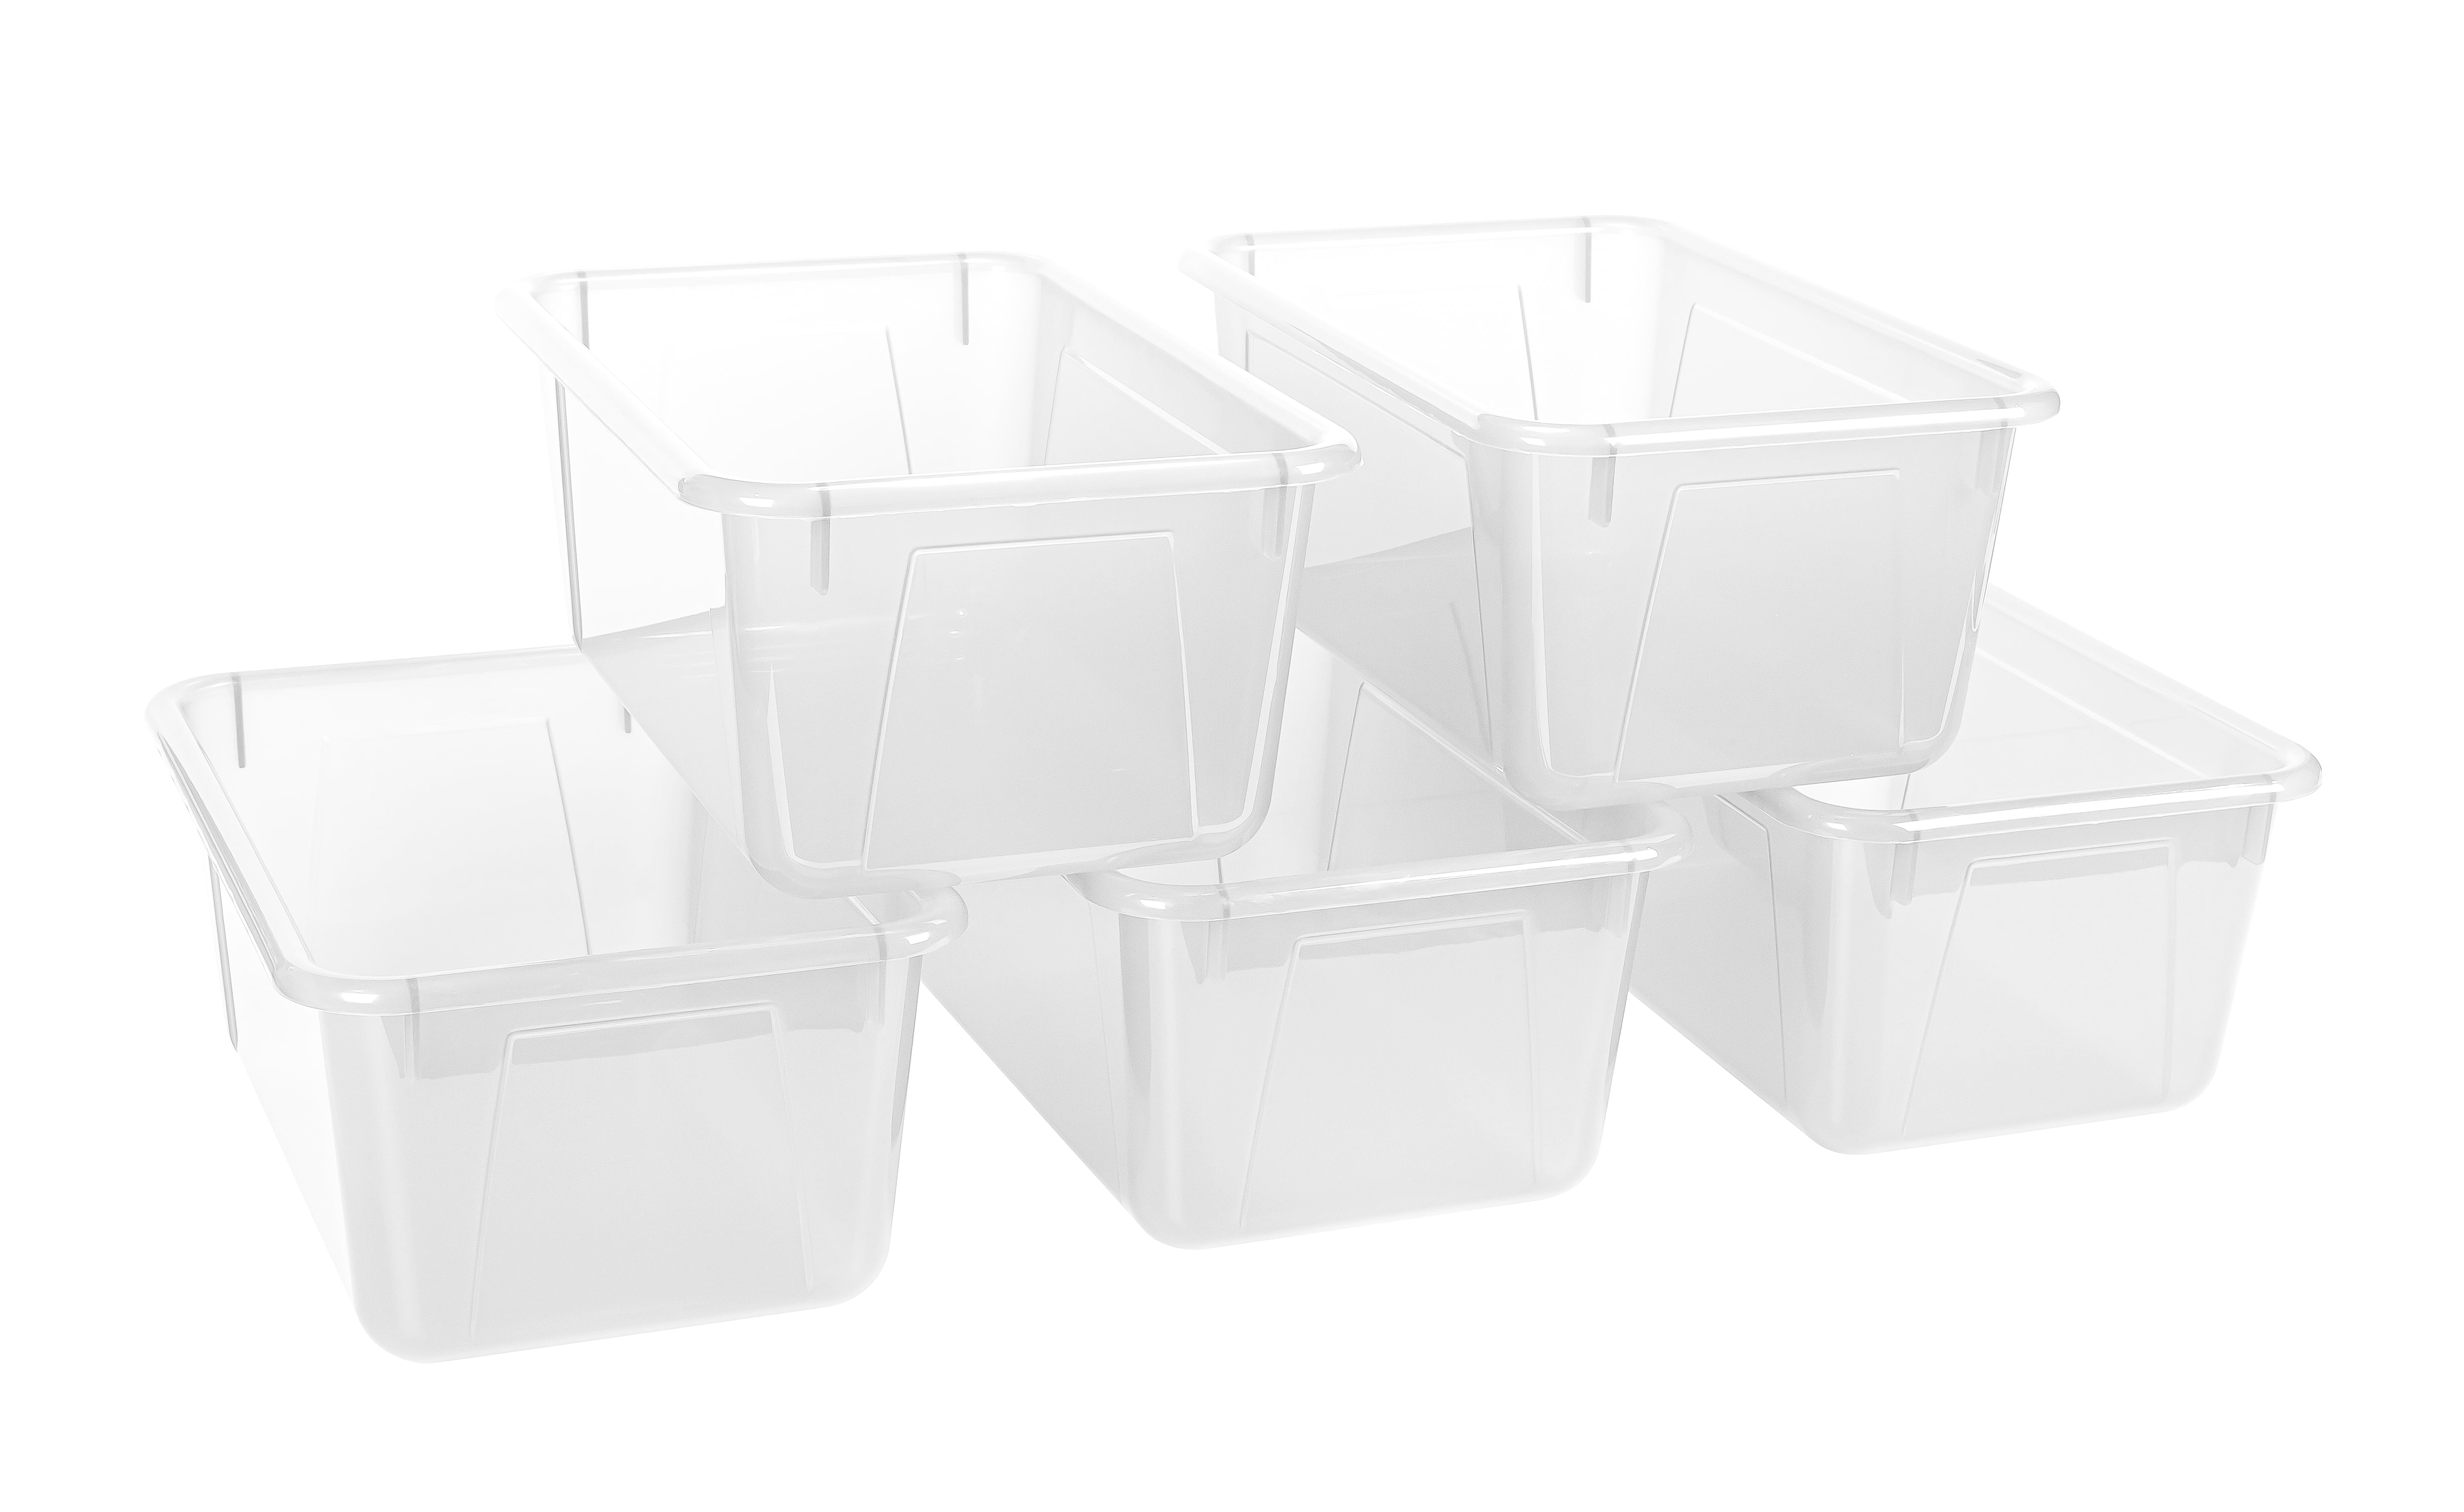 GAMENOTE Plastic Storage Bins with Lids - 5 Qt, 6 Pack Clear Small  Stackable Cubby Storage Organizer Containers for Organizing (12 × 7.2 × 5.1  inches)